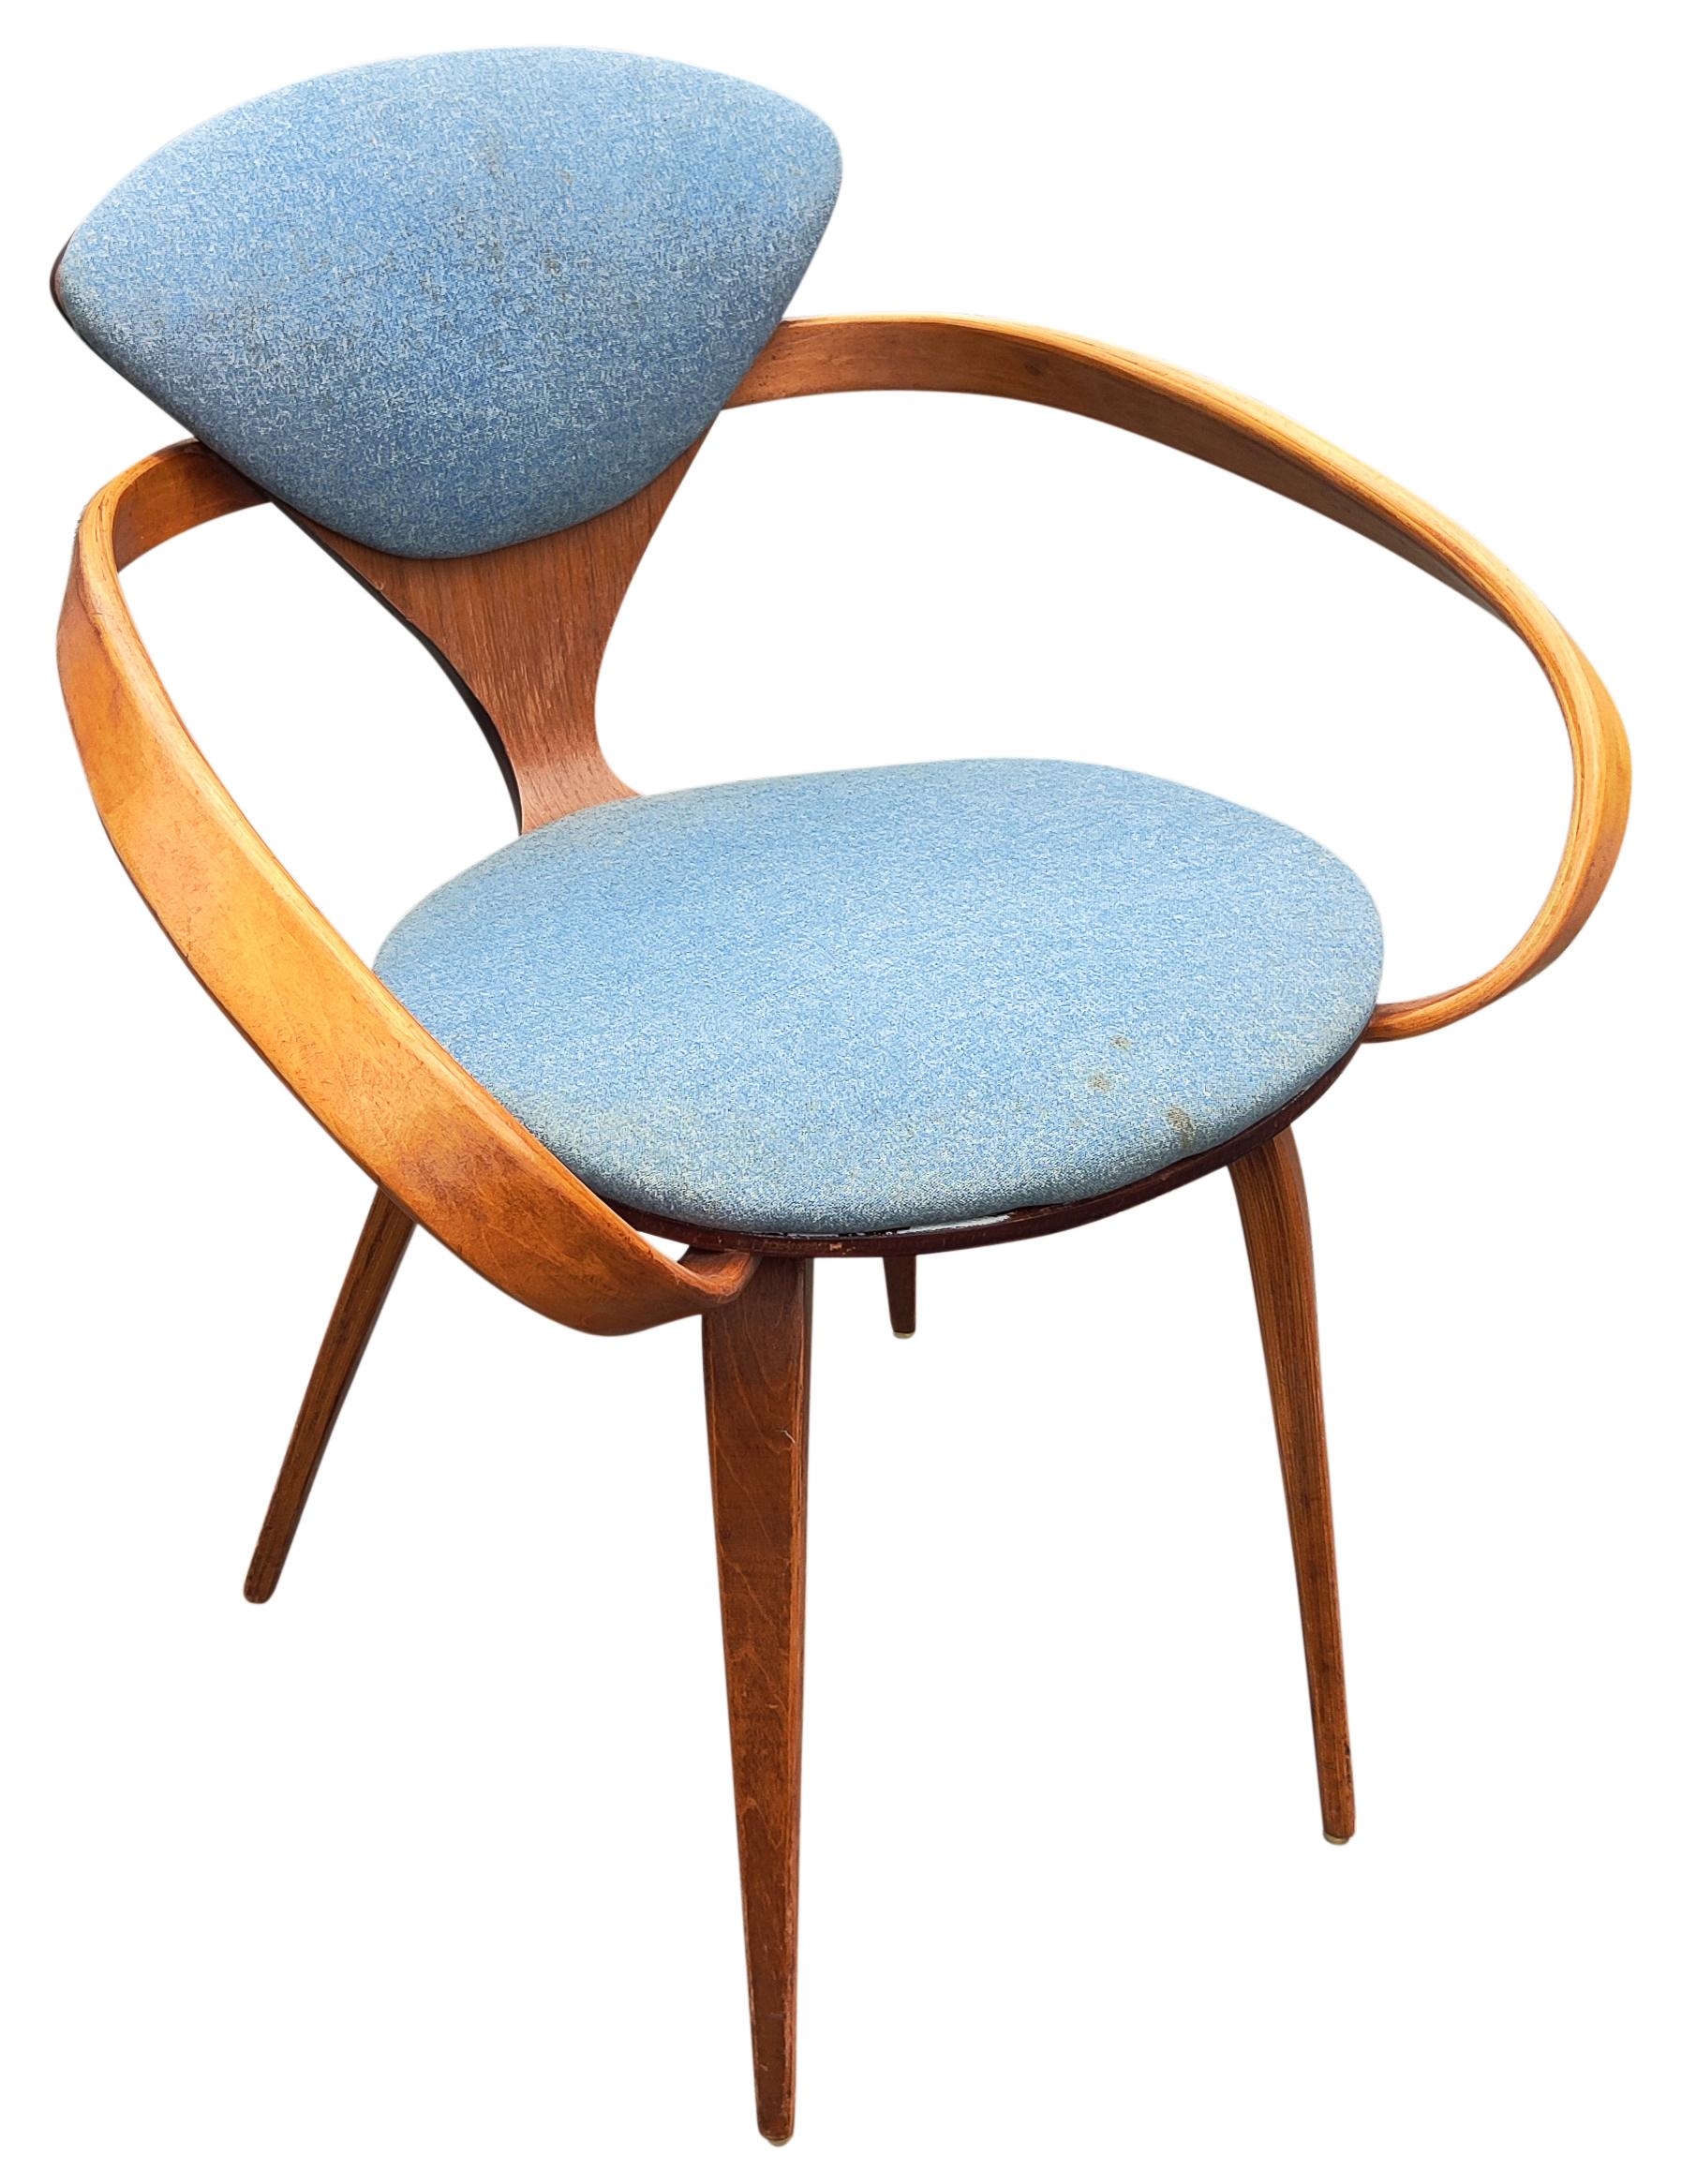 Iconic Pretzel armchair designed by Norman Cherner and made by Plycraft, still retaining original label. Laminated walnut construction with older recovered blue upholstery. Surprisingly sturdy and comfortable. Please note, I am offering four